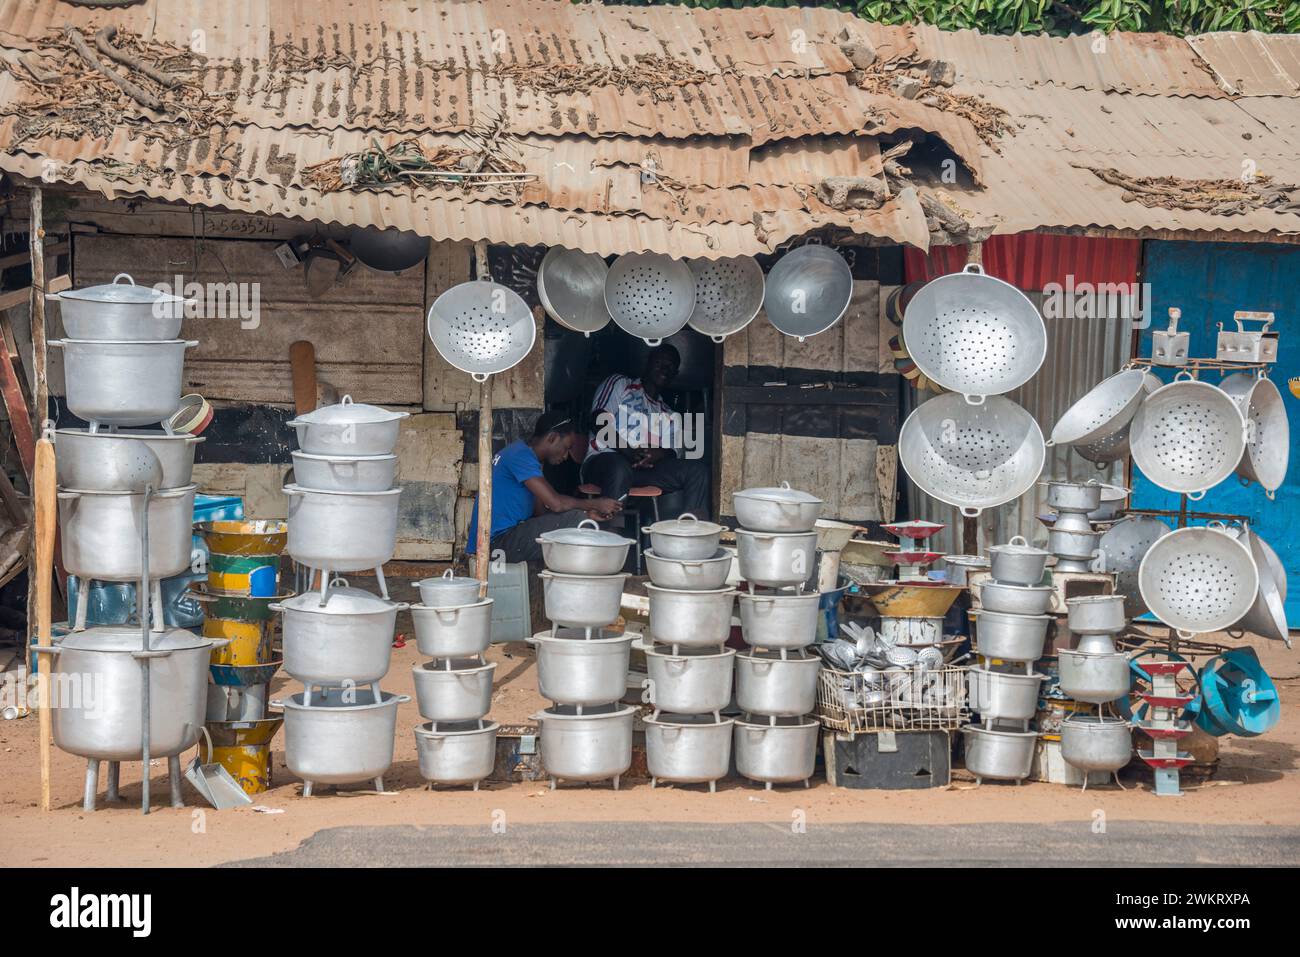 Aluminum utensils for domestic use in a shop in The Gambia. Stock Photo